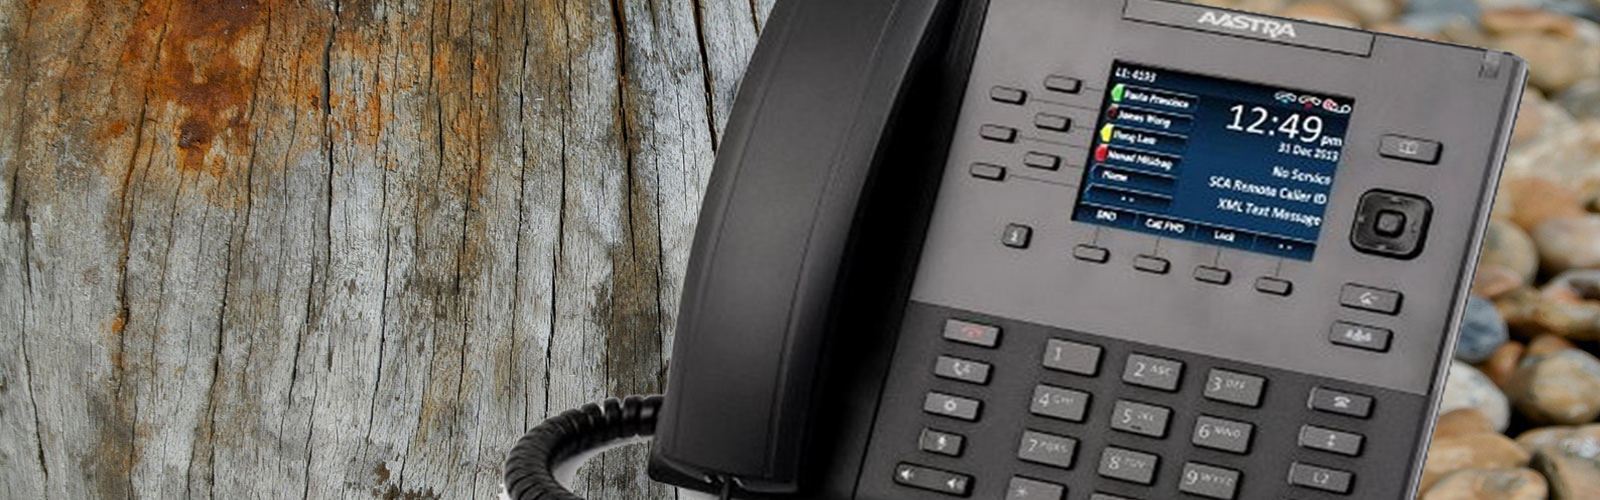 VOIP Telephone Service Providers